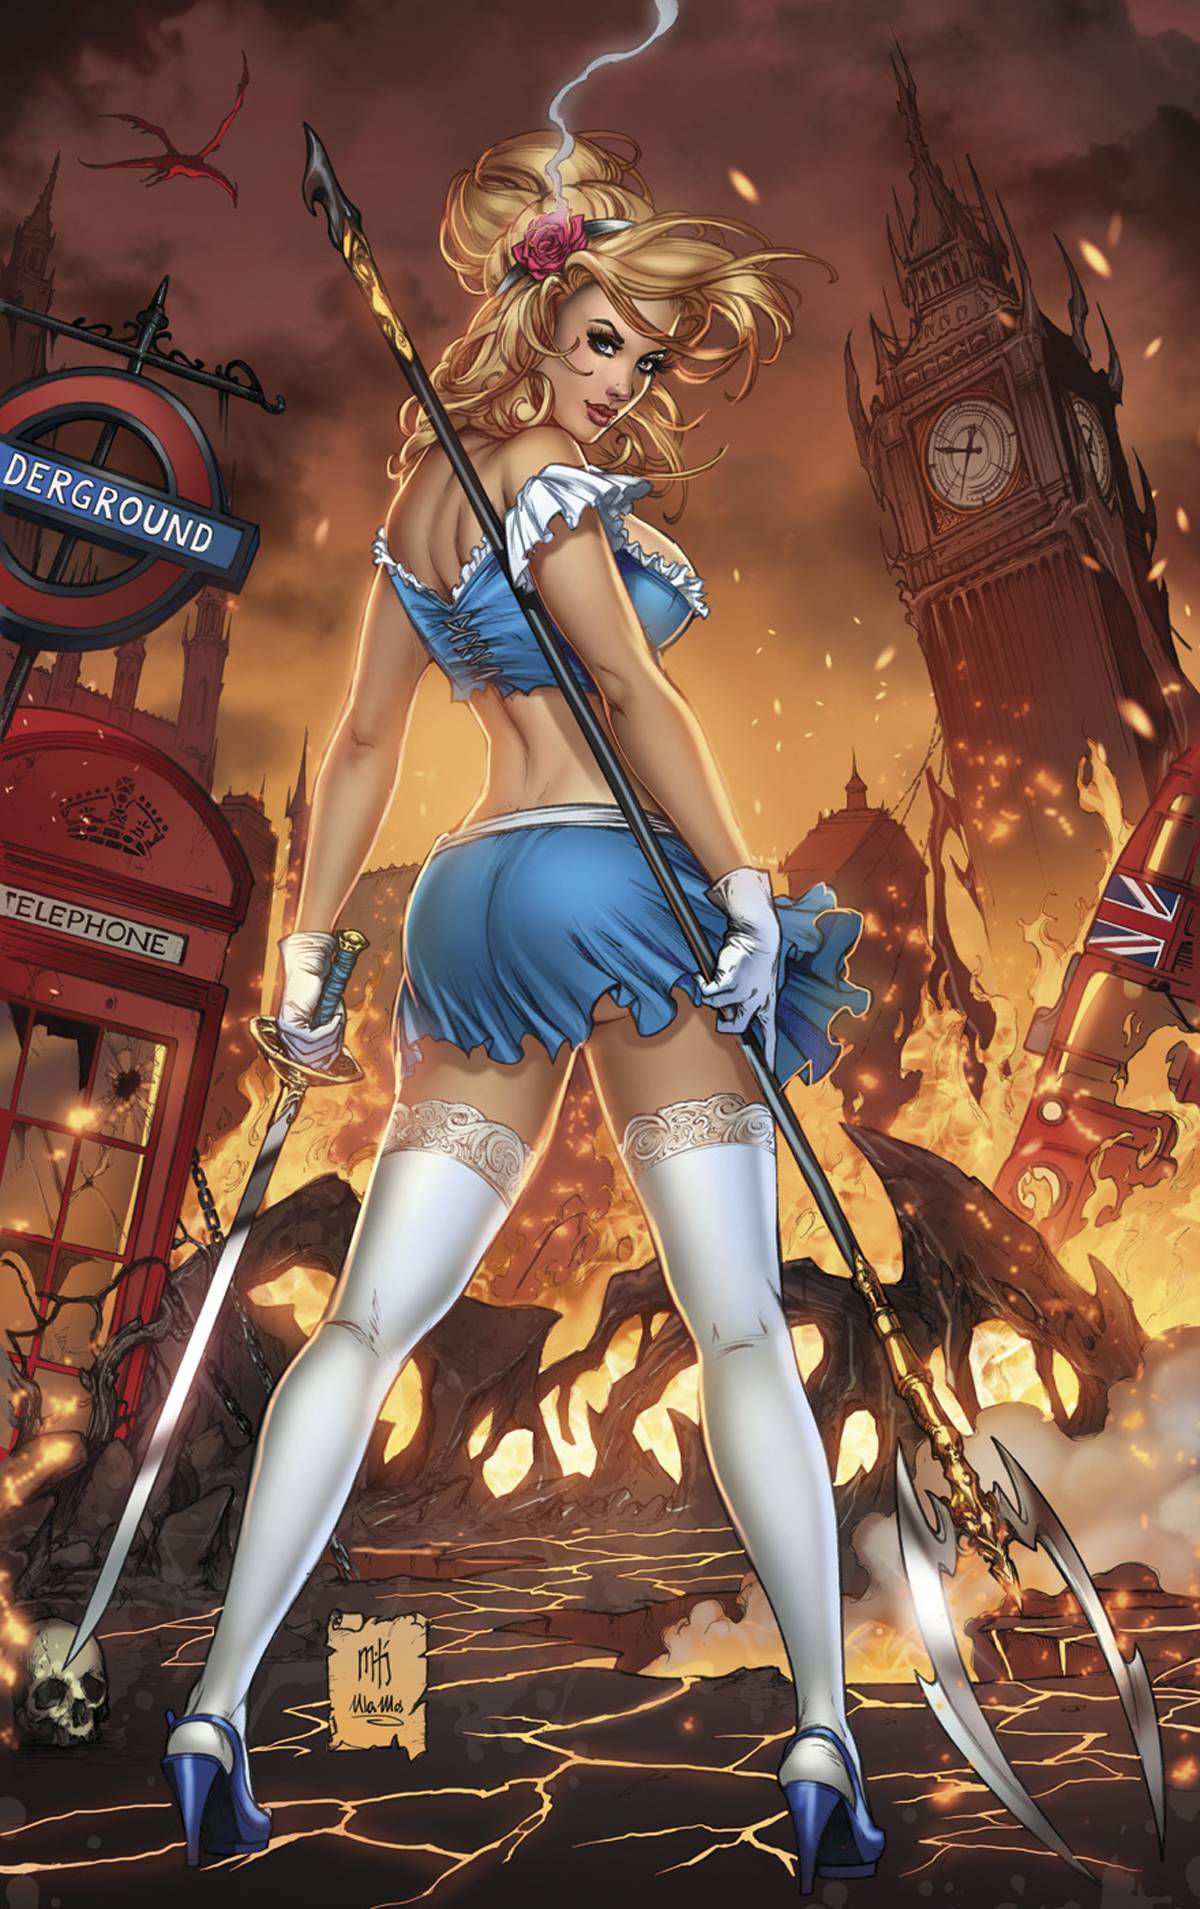 Grimm Fairy Tales: Bad Girls Backgrounds, Compatible - PC, Mobile, Gadgets| 1200x1909 px